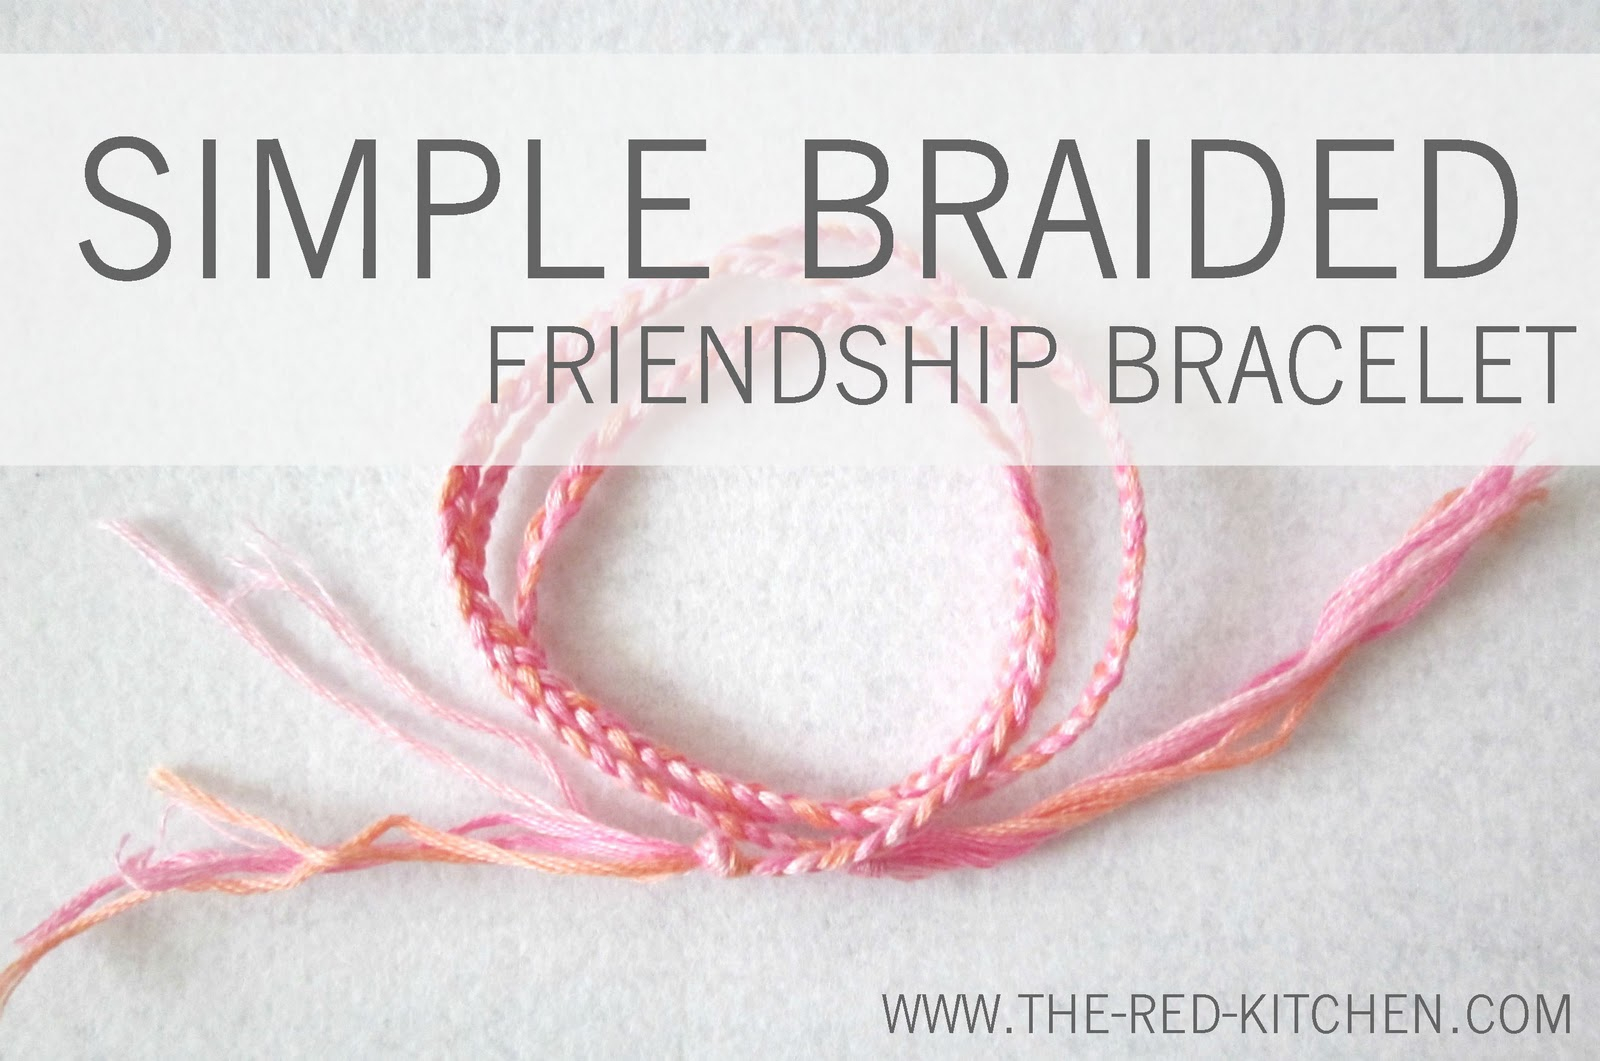 Bracelet Patterns With Embroidery Floss The Red Kitchen Simple Braided Friendship Bracelet A Tutorial In